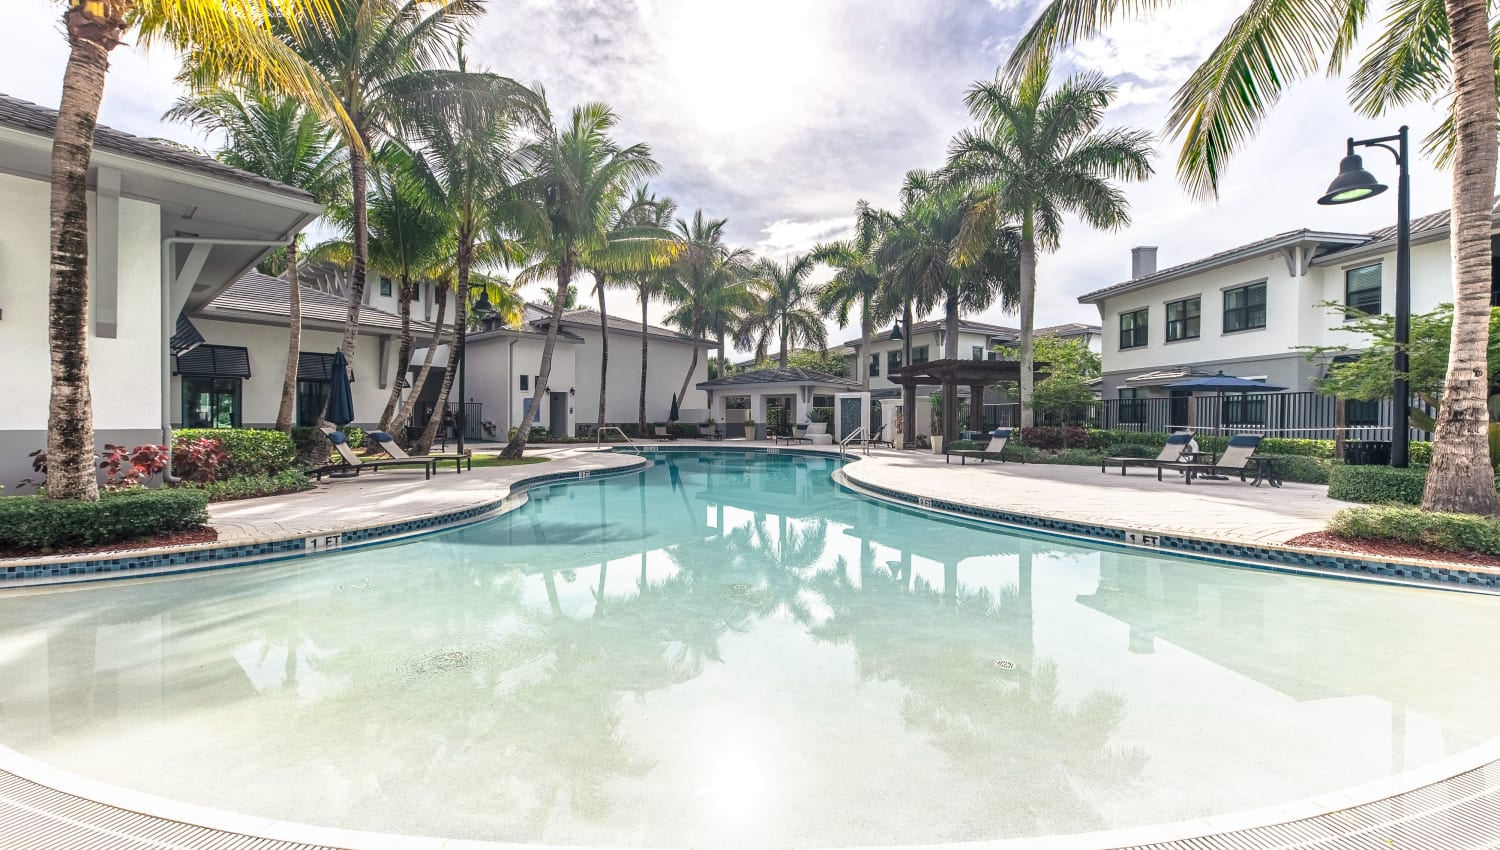 Sparkling pool at The Hamptons at Palm Beach Gardens Apartments in Palm Beach Gardens, Florida